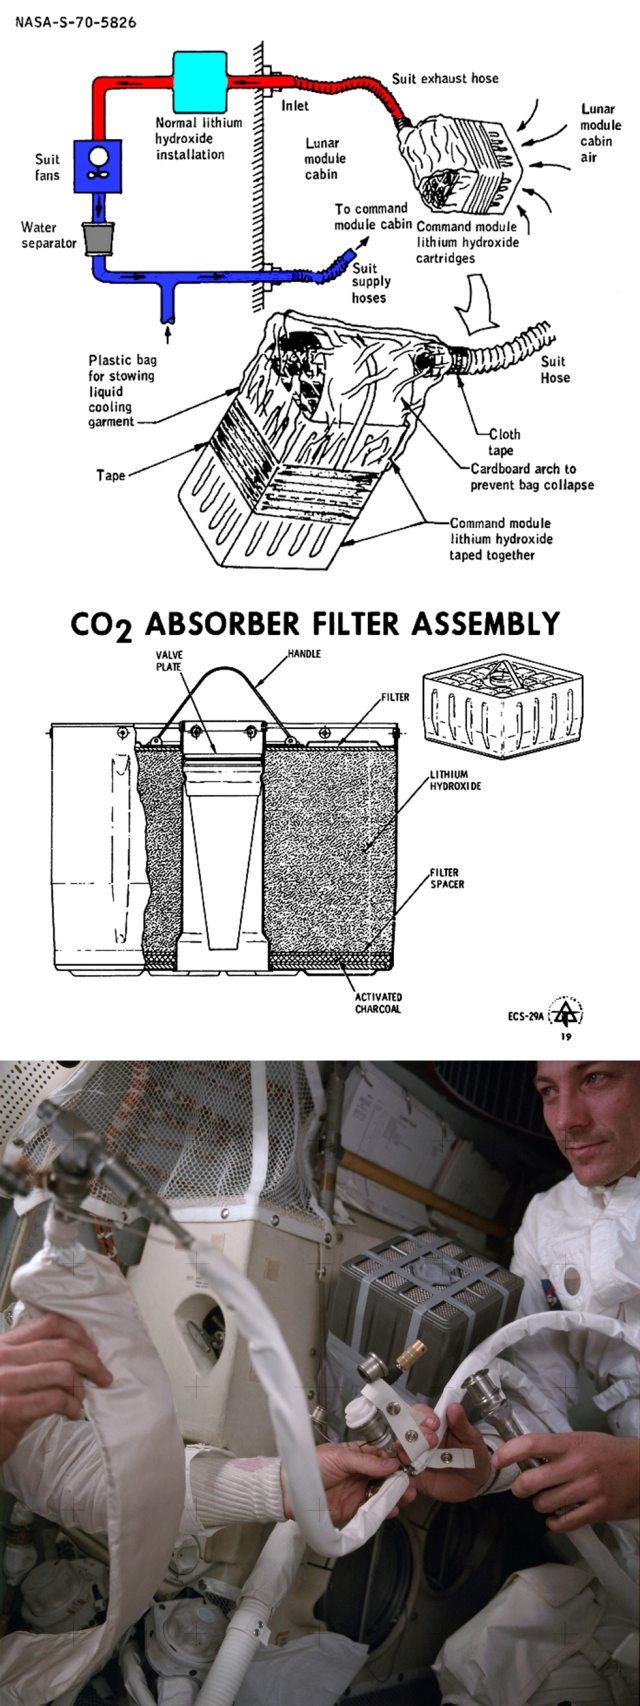 1 & 2. Schematic of the mailbox adapter. The second canister was taped onto the first later in the mission to provide further scrubbing capacity without having to rebuild the entire adapter.
3.  Astronaut John Swigert holds the rigged arrangement used to purge carbon dioxide from the Lunar Module. 
Image credit: NASA